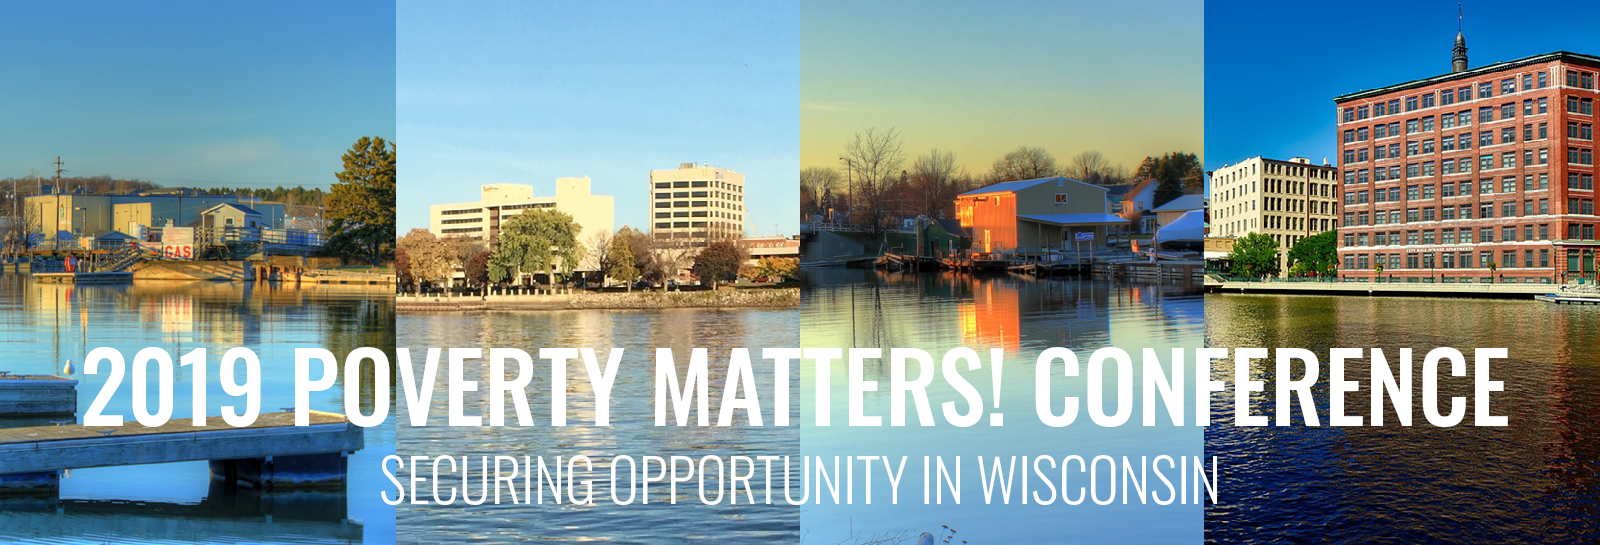 2019 Poverty Matters! Conference Securing Opportunity in Wisconsin